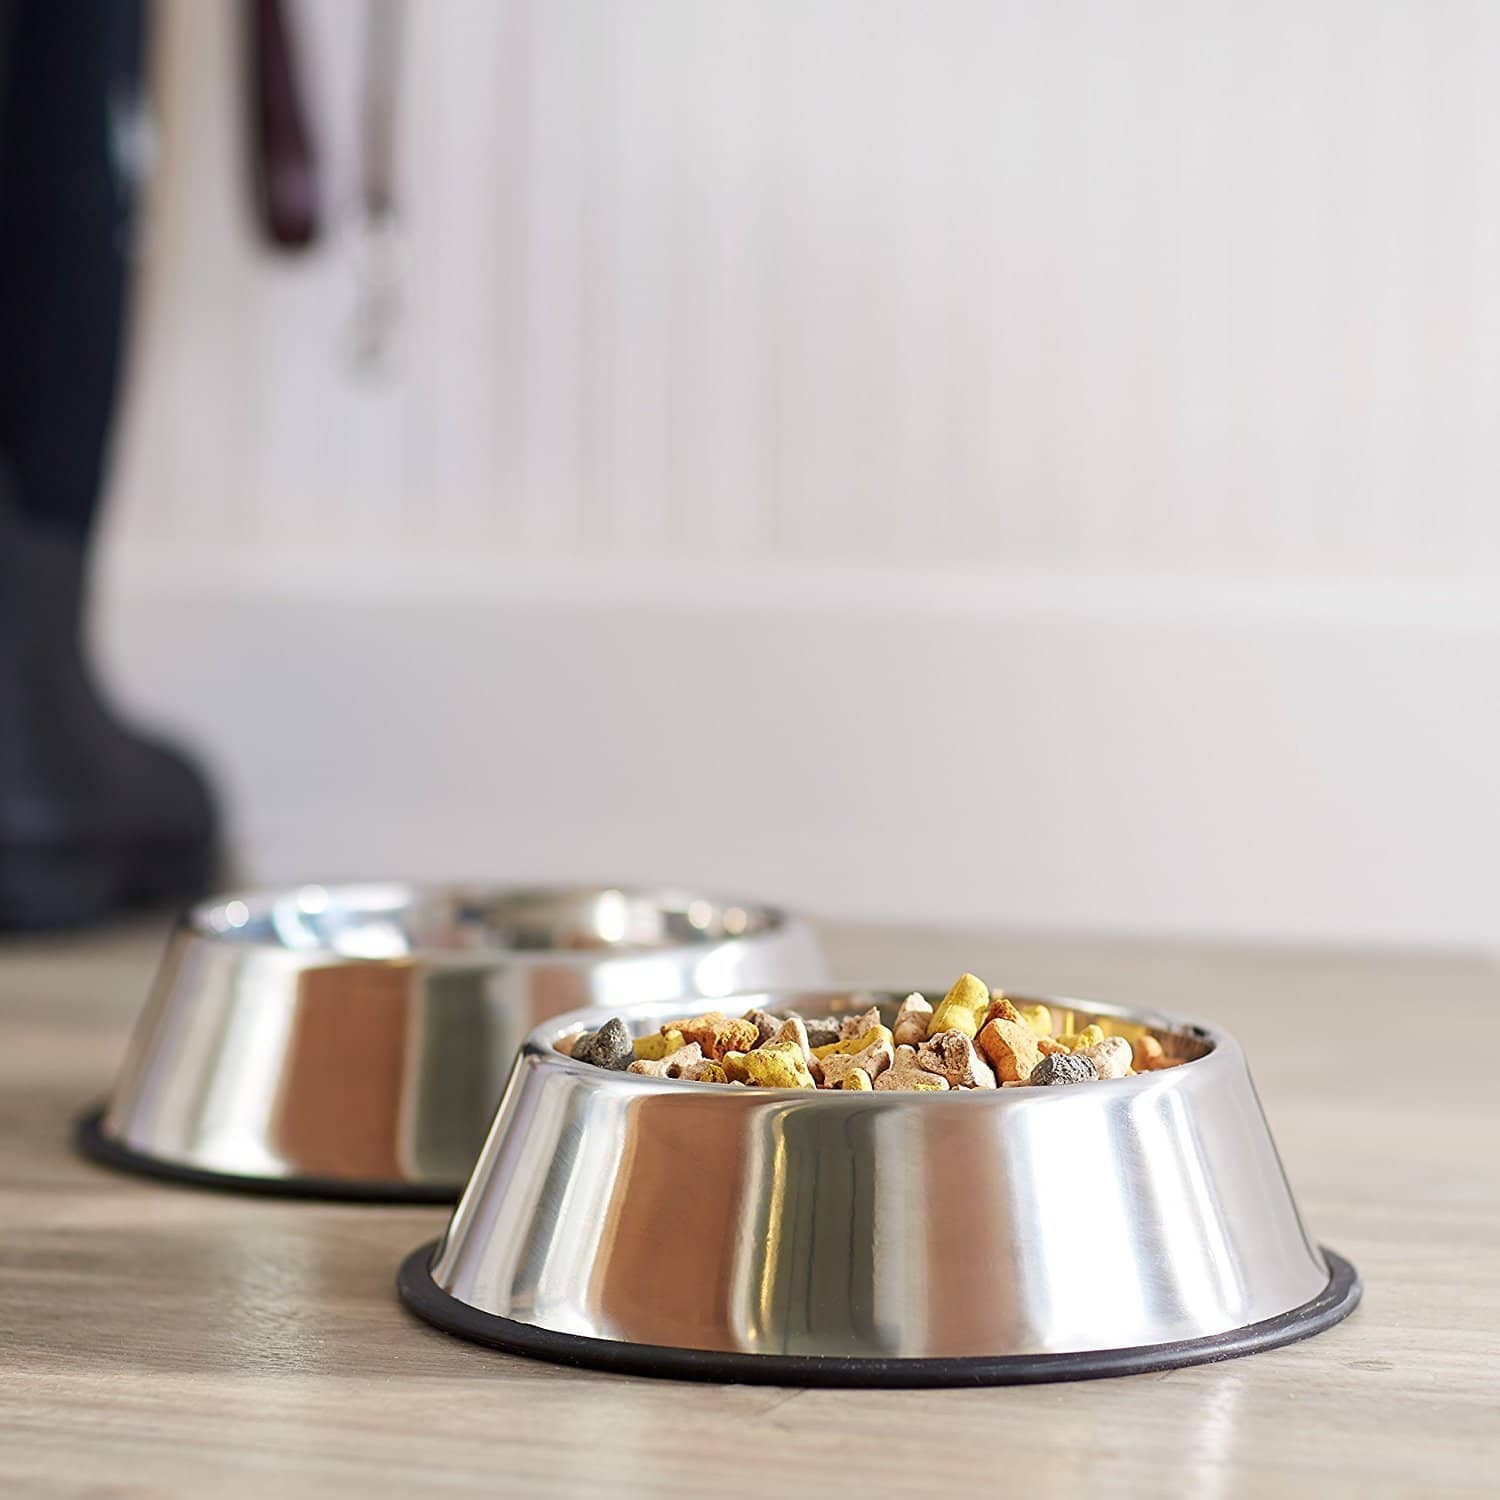 Dog bowls Steel bowls that are affordable & durable for regular use